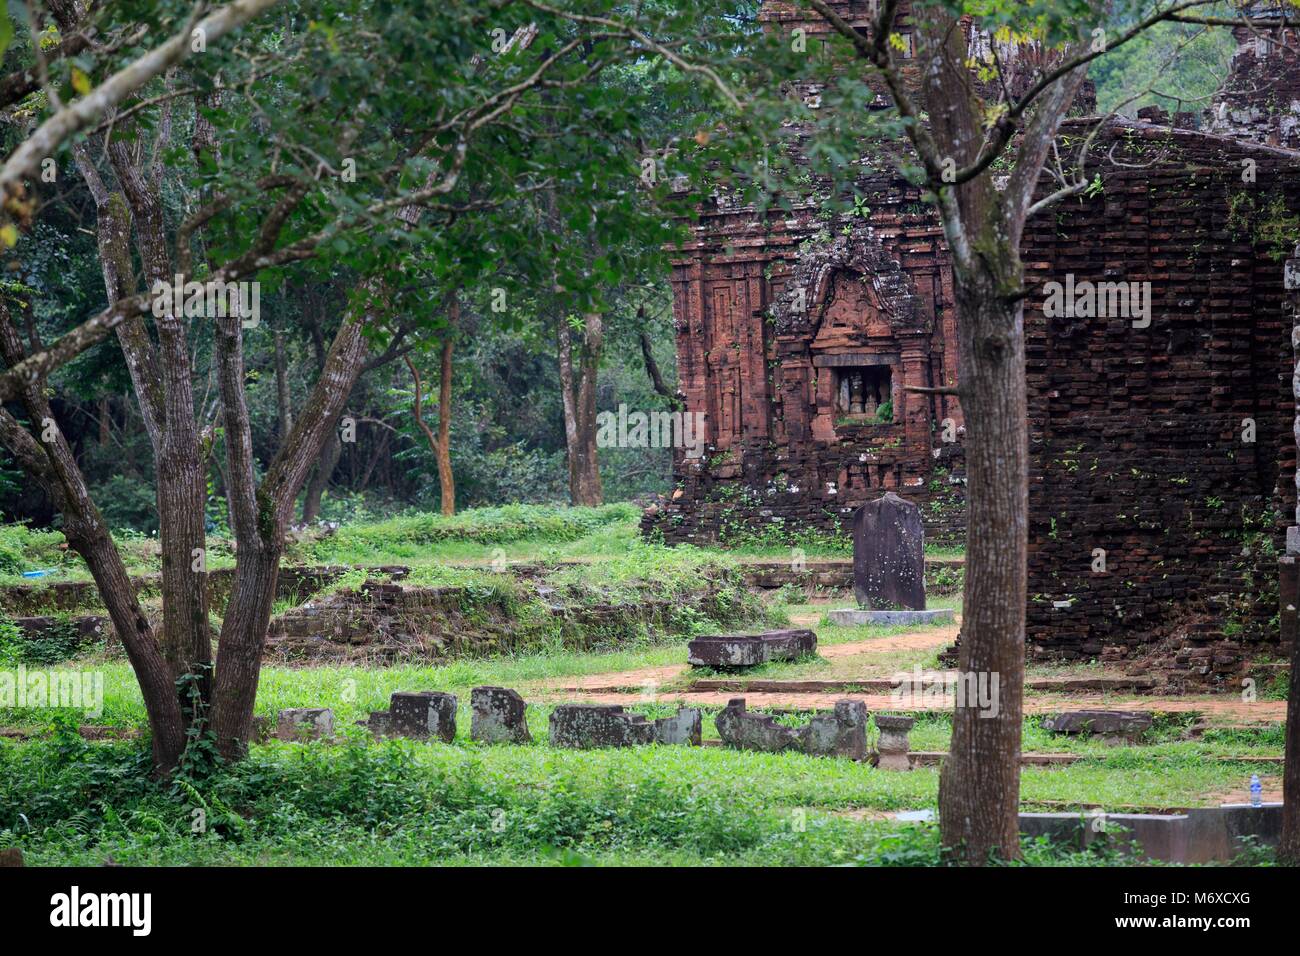 The ancient Hindu temple complex of My Son in the jungles of Qang Nam Province, Vietnam Stock Photo